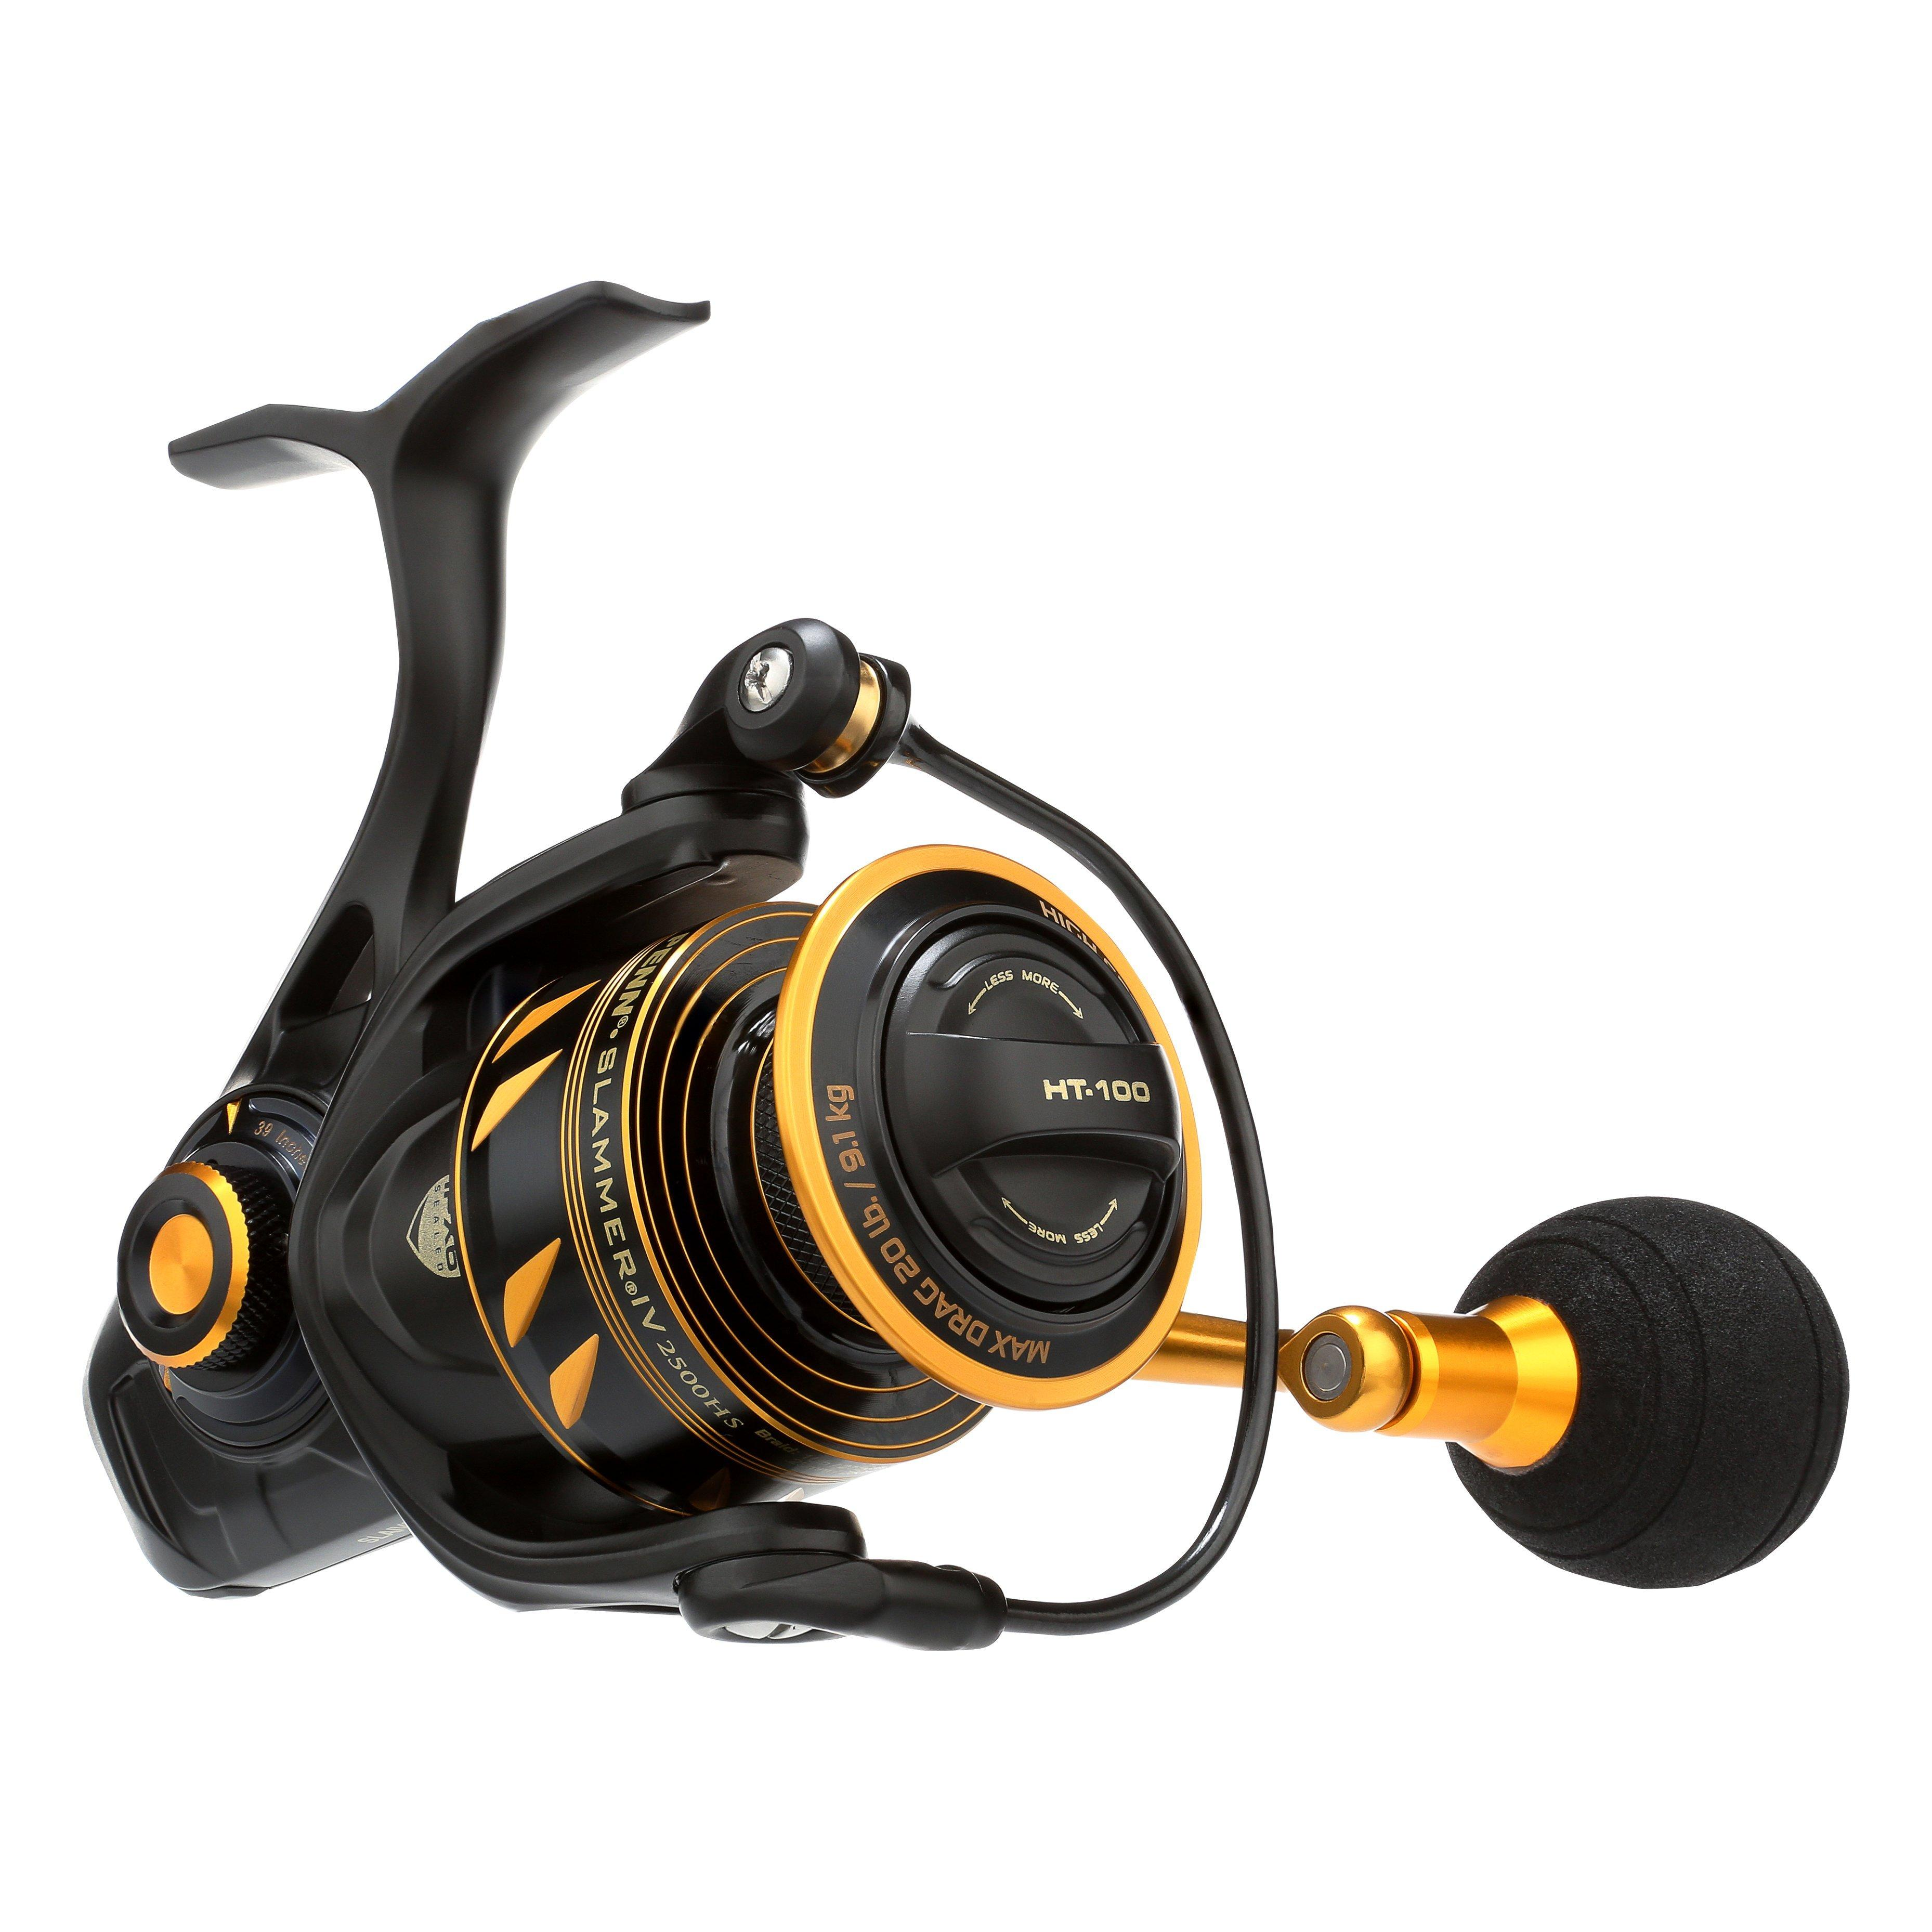 Penn Battle II 8000 Fishing Reel - How to take apart, service and  reassemble 